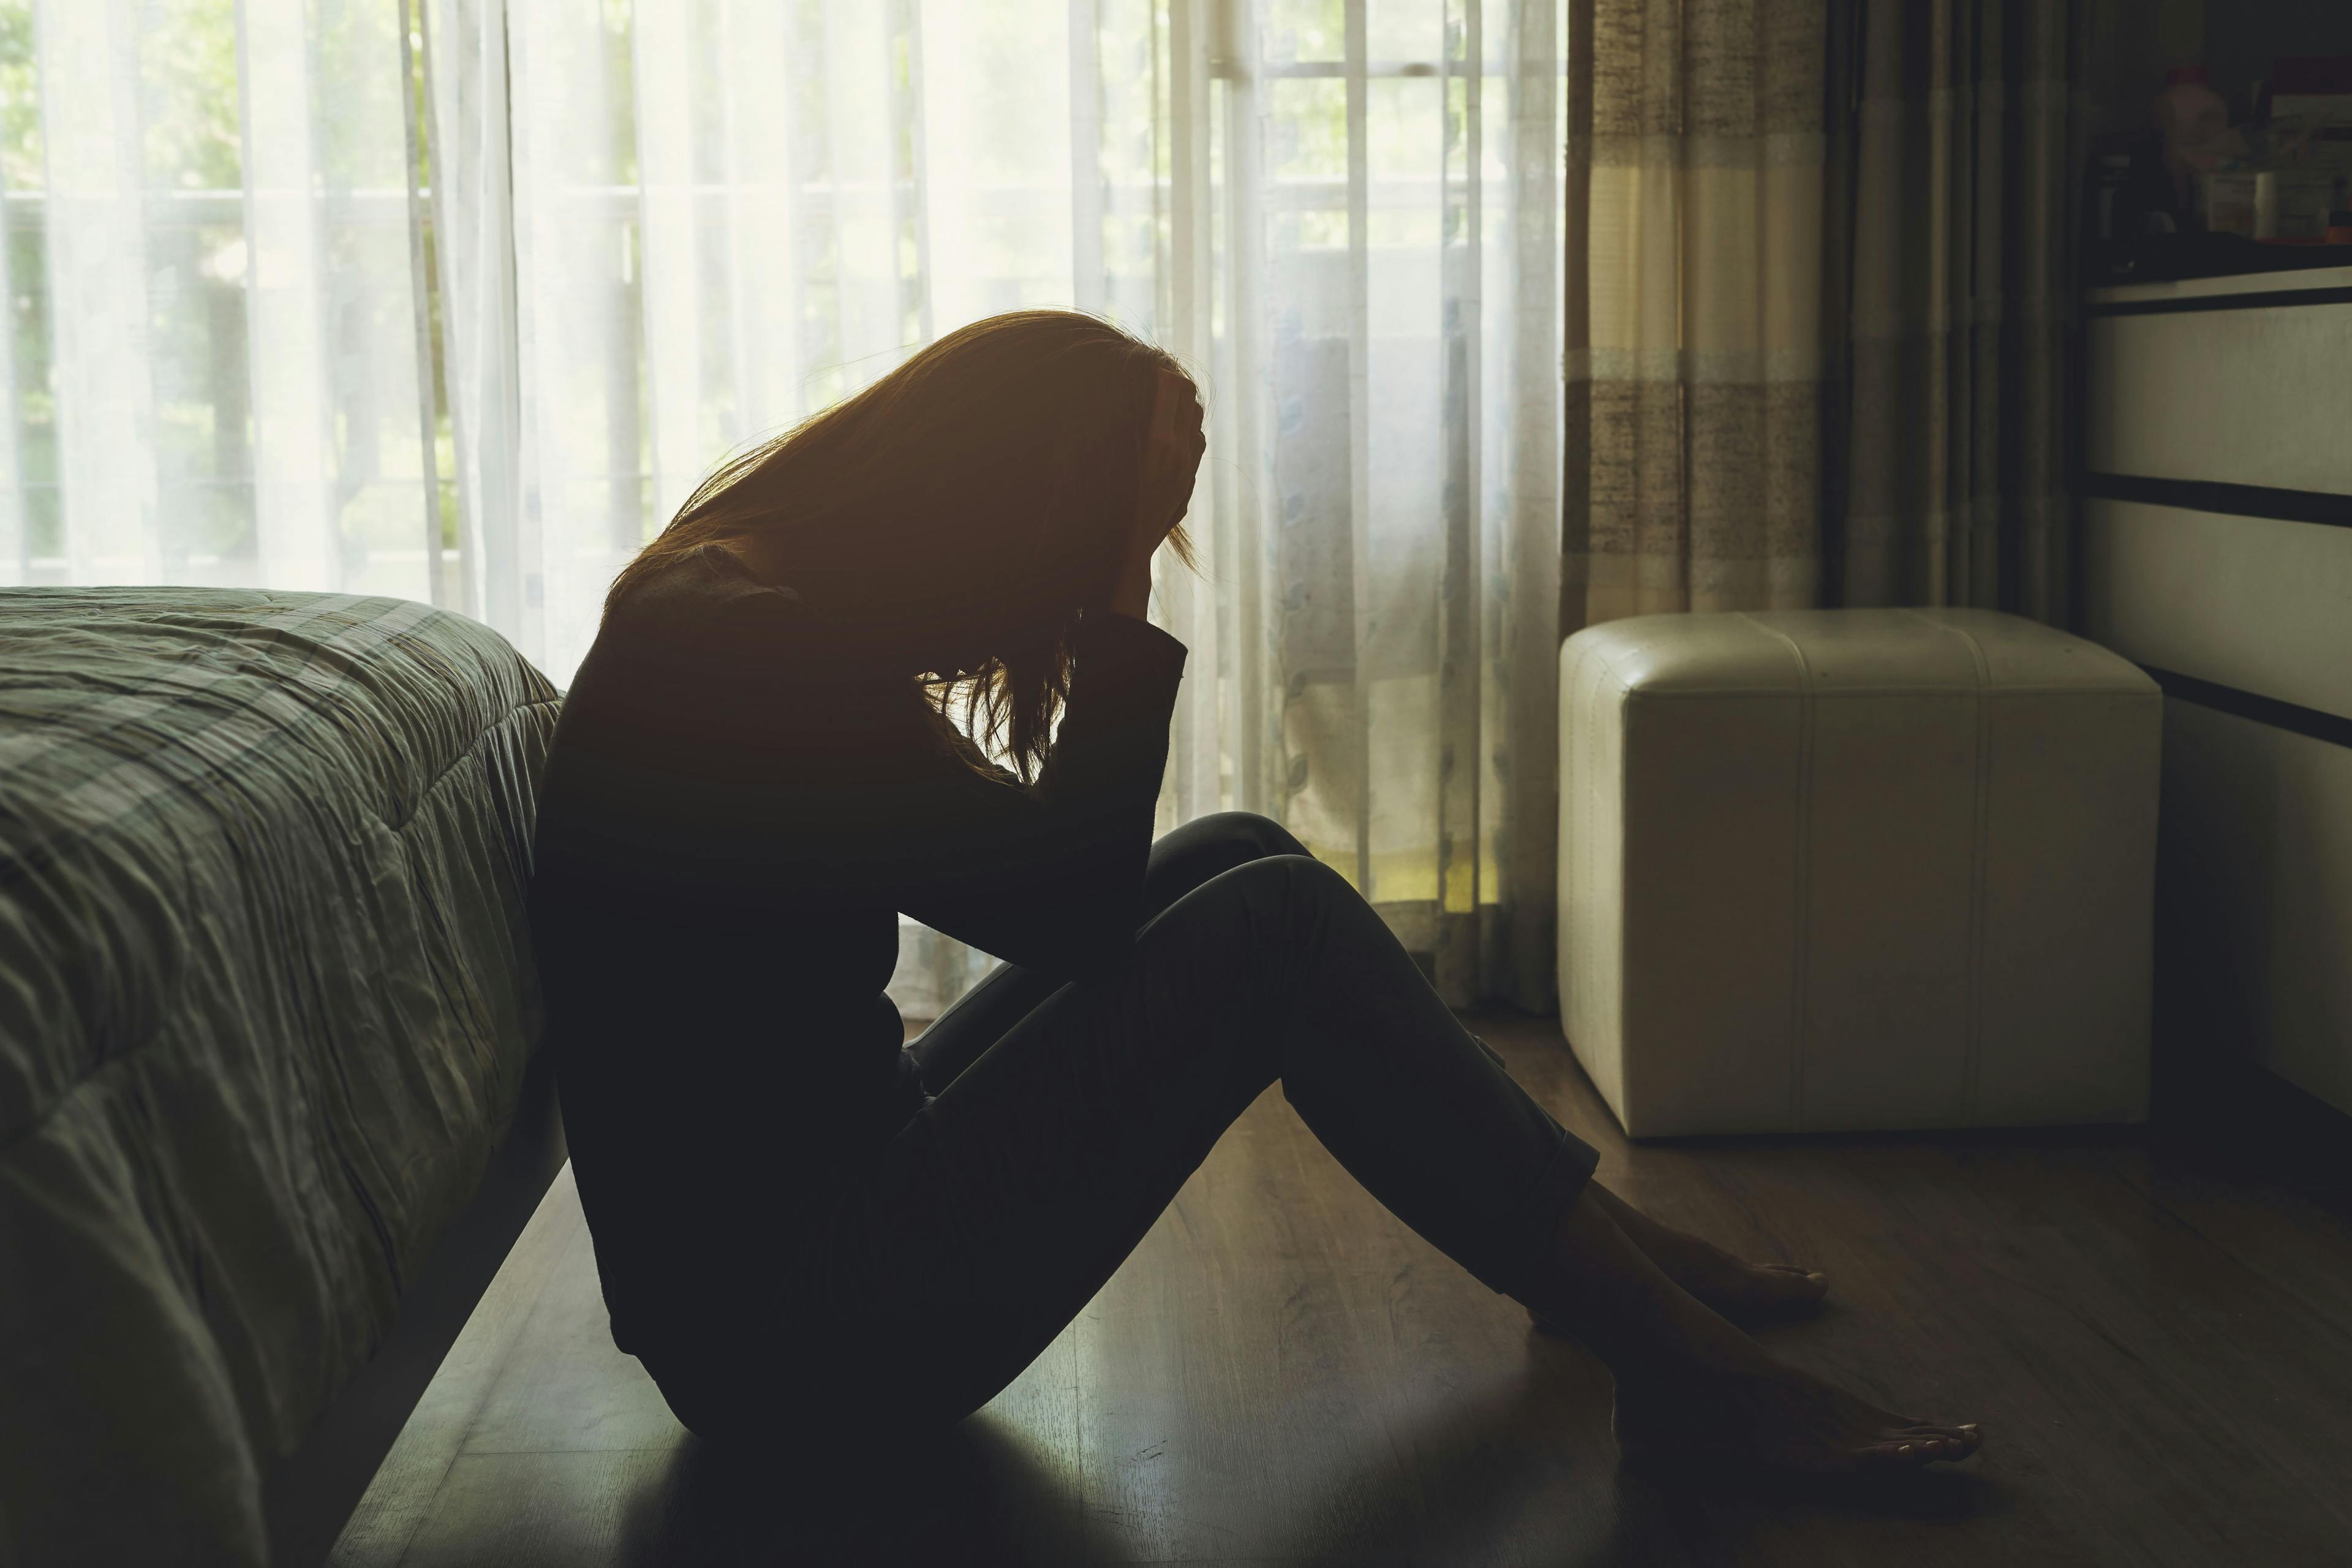 Lonely young woman feeling depressed and stressed sitting head in hands in the dark bedroom, Negative emotion and mental health concept | Image credit: Kittiphan - stock.adobe.com